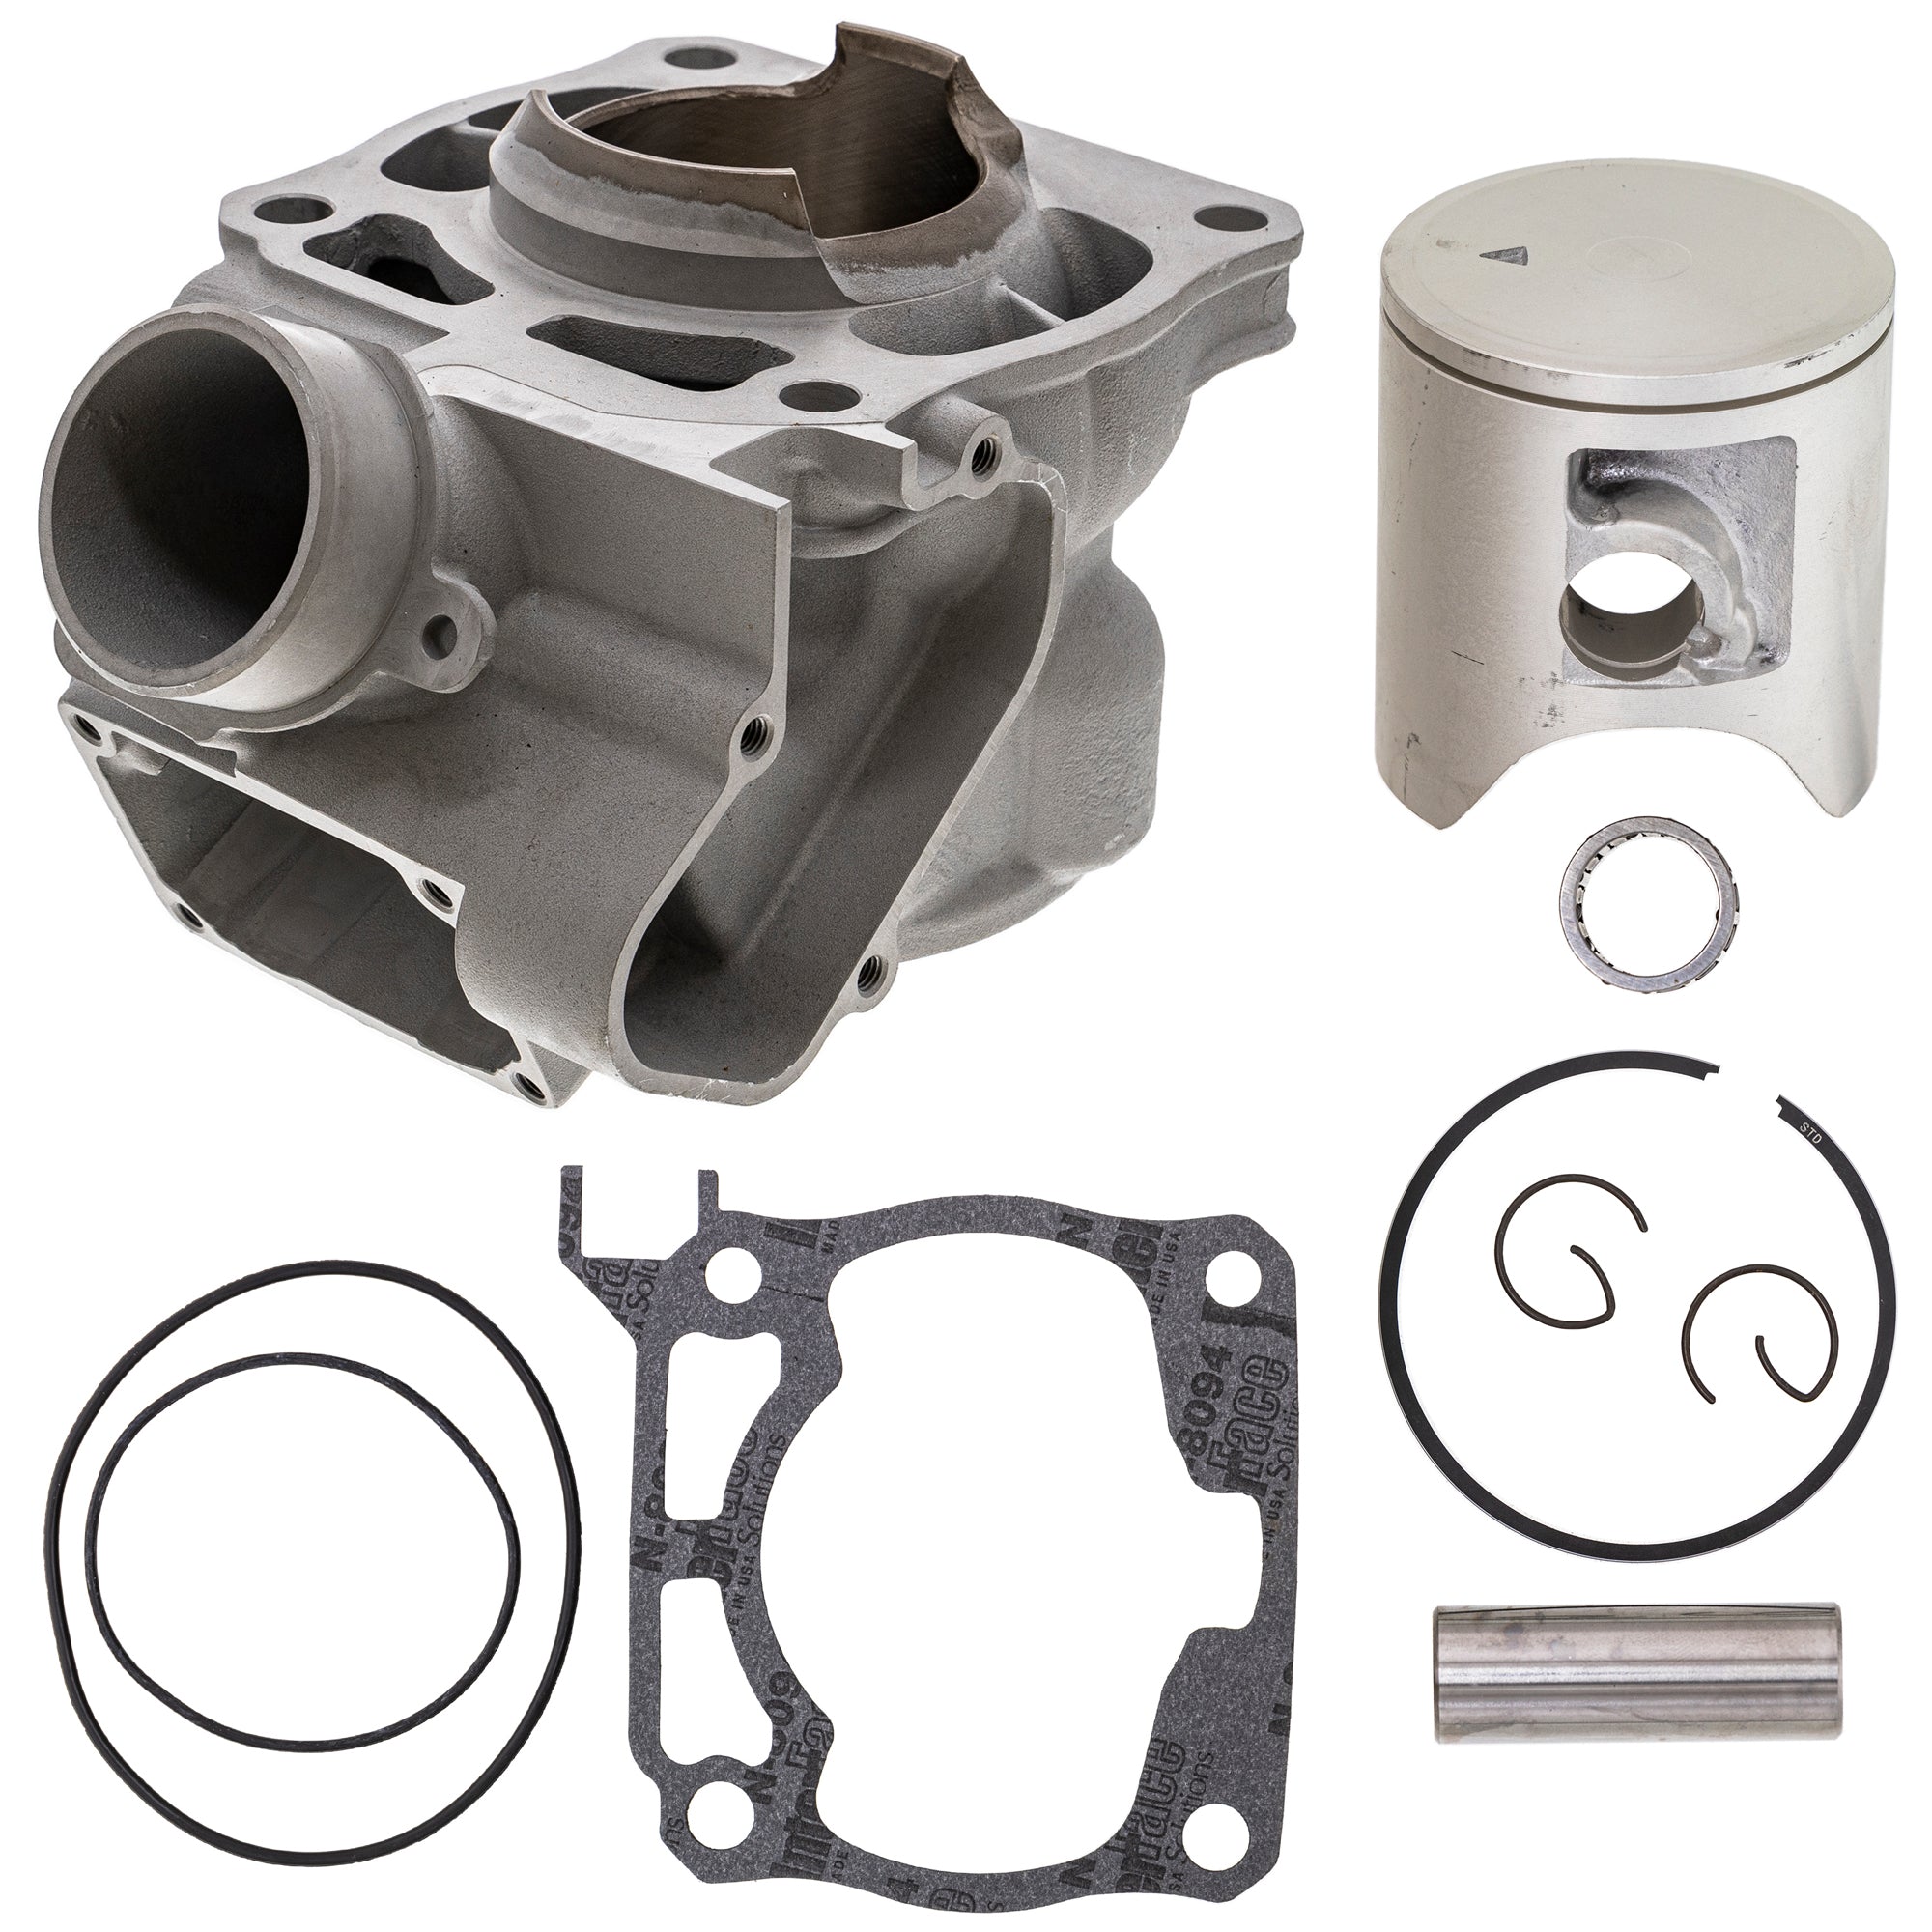 Top End Kit Cylinder Piston Gasket for zOTHER Yamaha YZ125 93450-16812-00 93450-16068-00 NICHE MK1000972